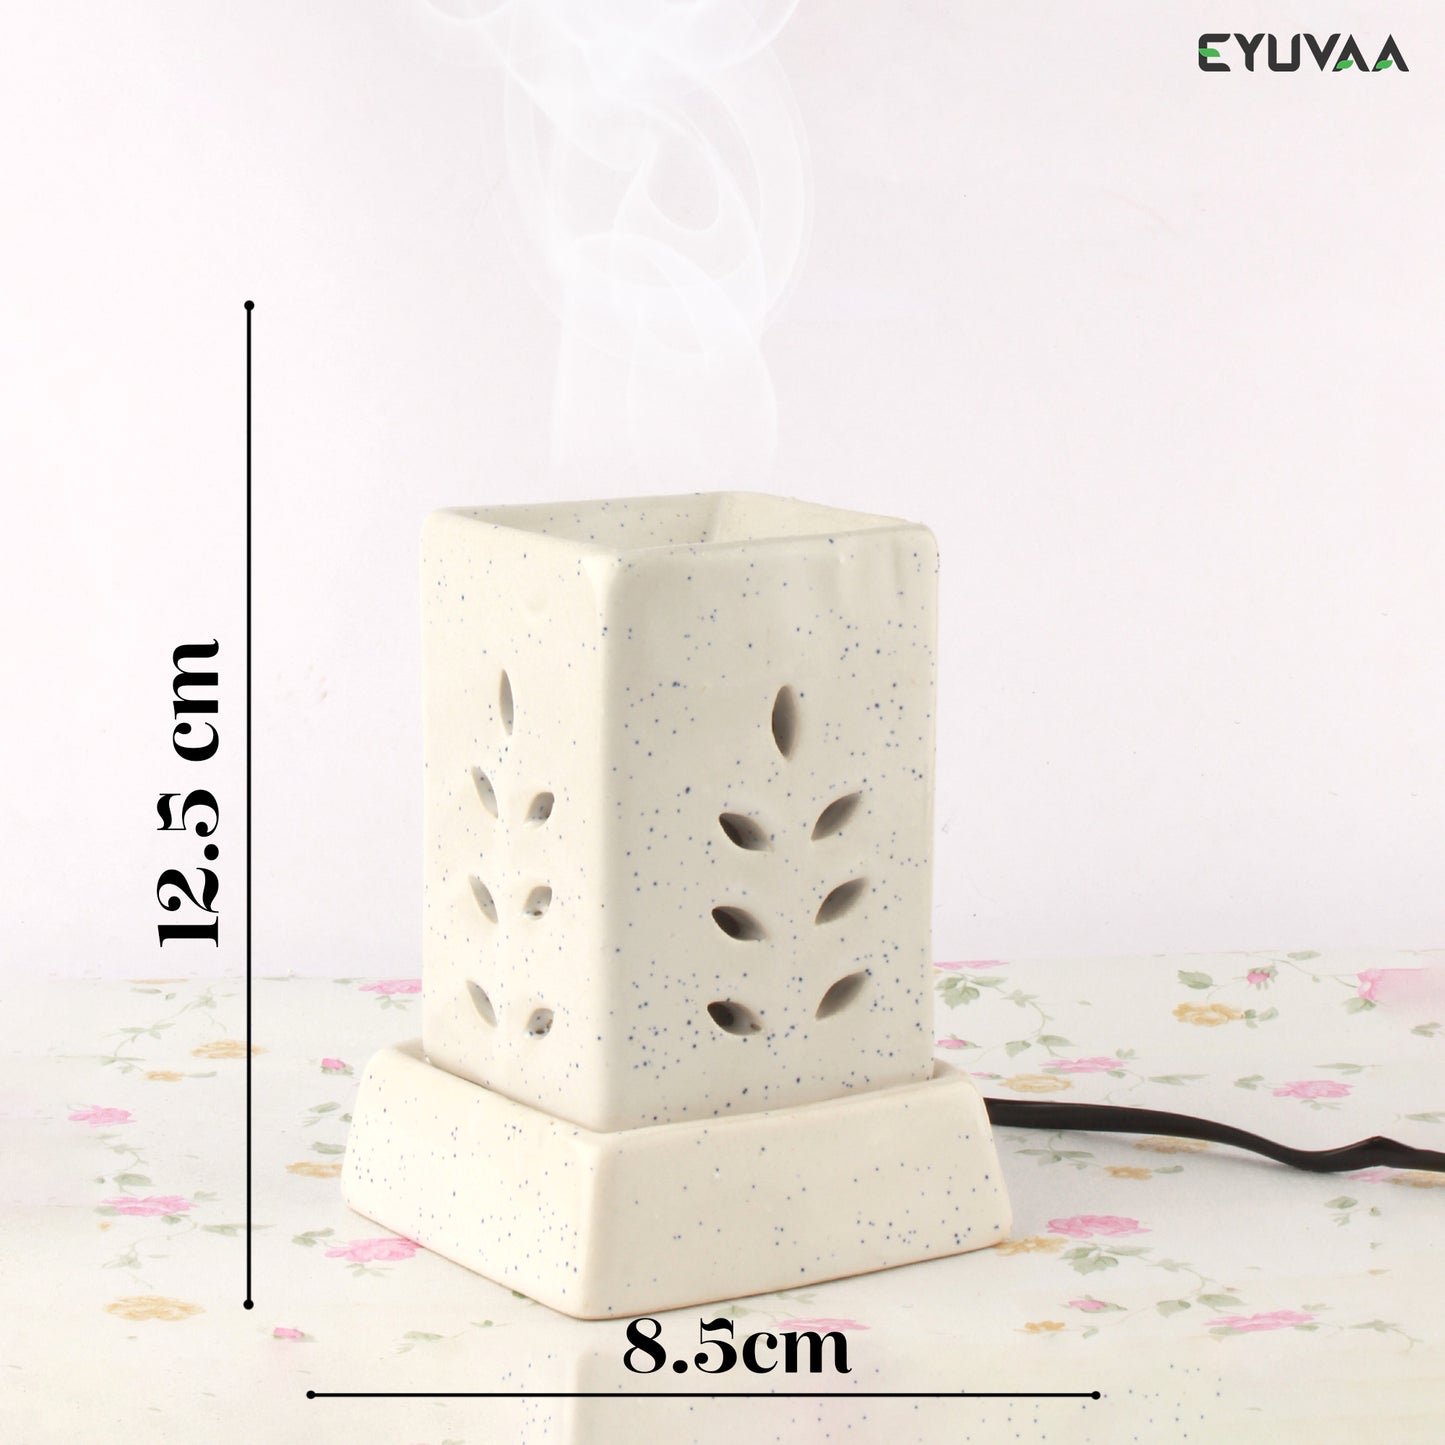 Pillar Shape Electric Aroma Diffuser, Pillar Diffuser, Aromatherapy Diffuser Set for Home Fragrance, Oil Warmer with 10 ml Fragrance Oil (White)